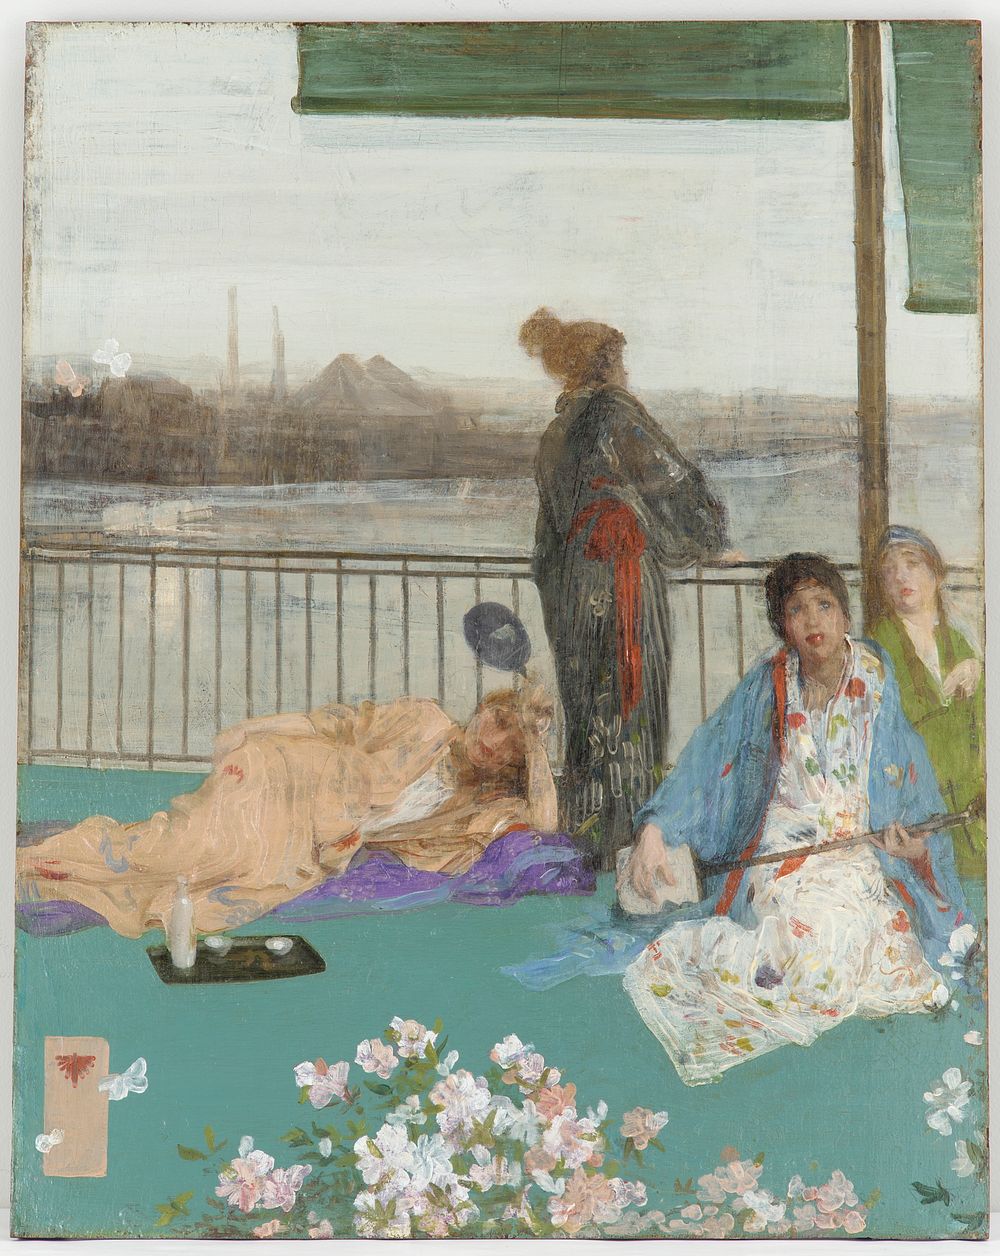 Variations in Flesh Colour and Green - The Balcony, James Abbott McNeill Whistler (1834-1903)